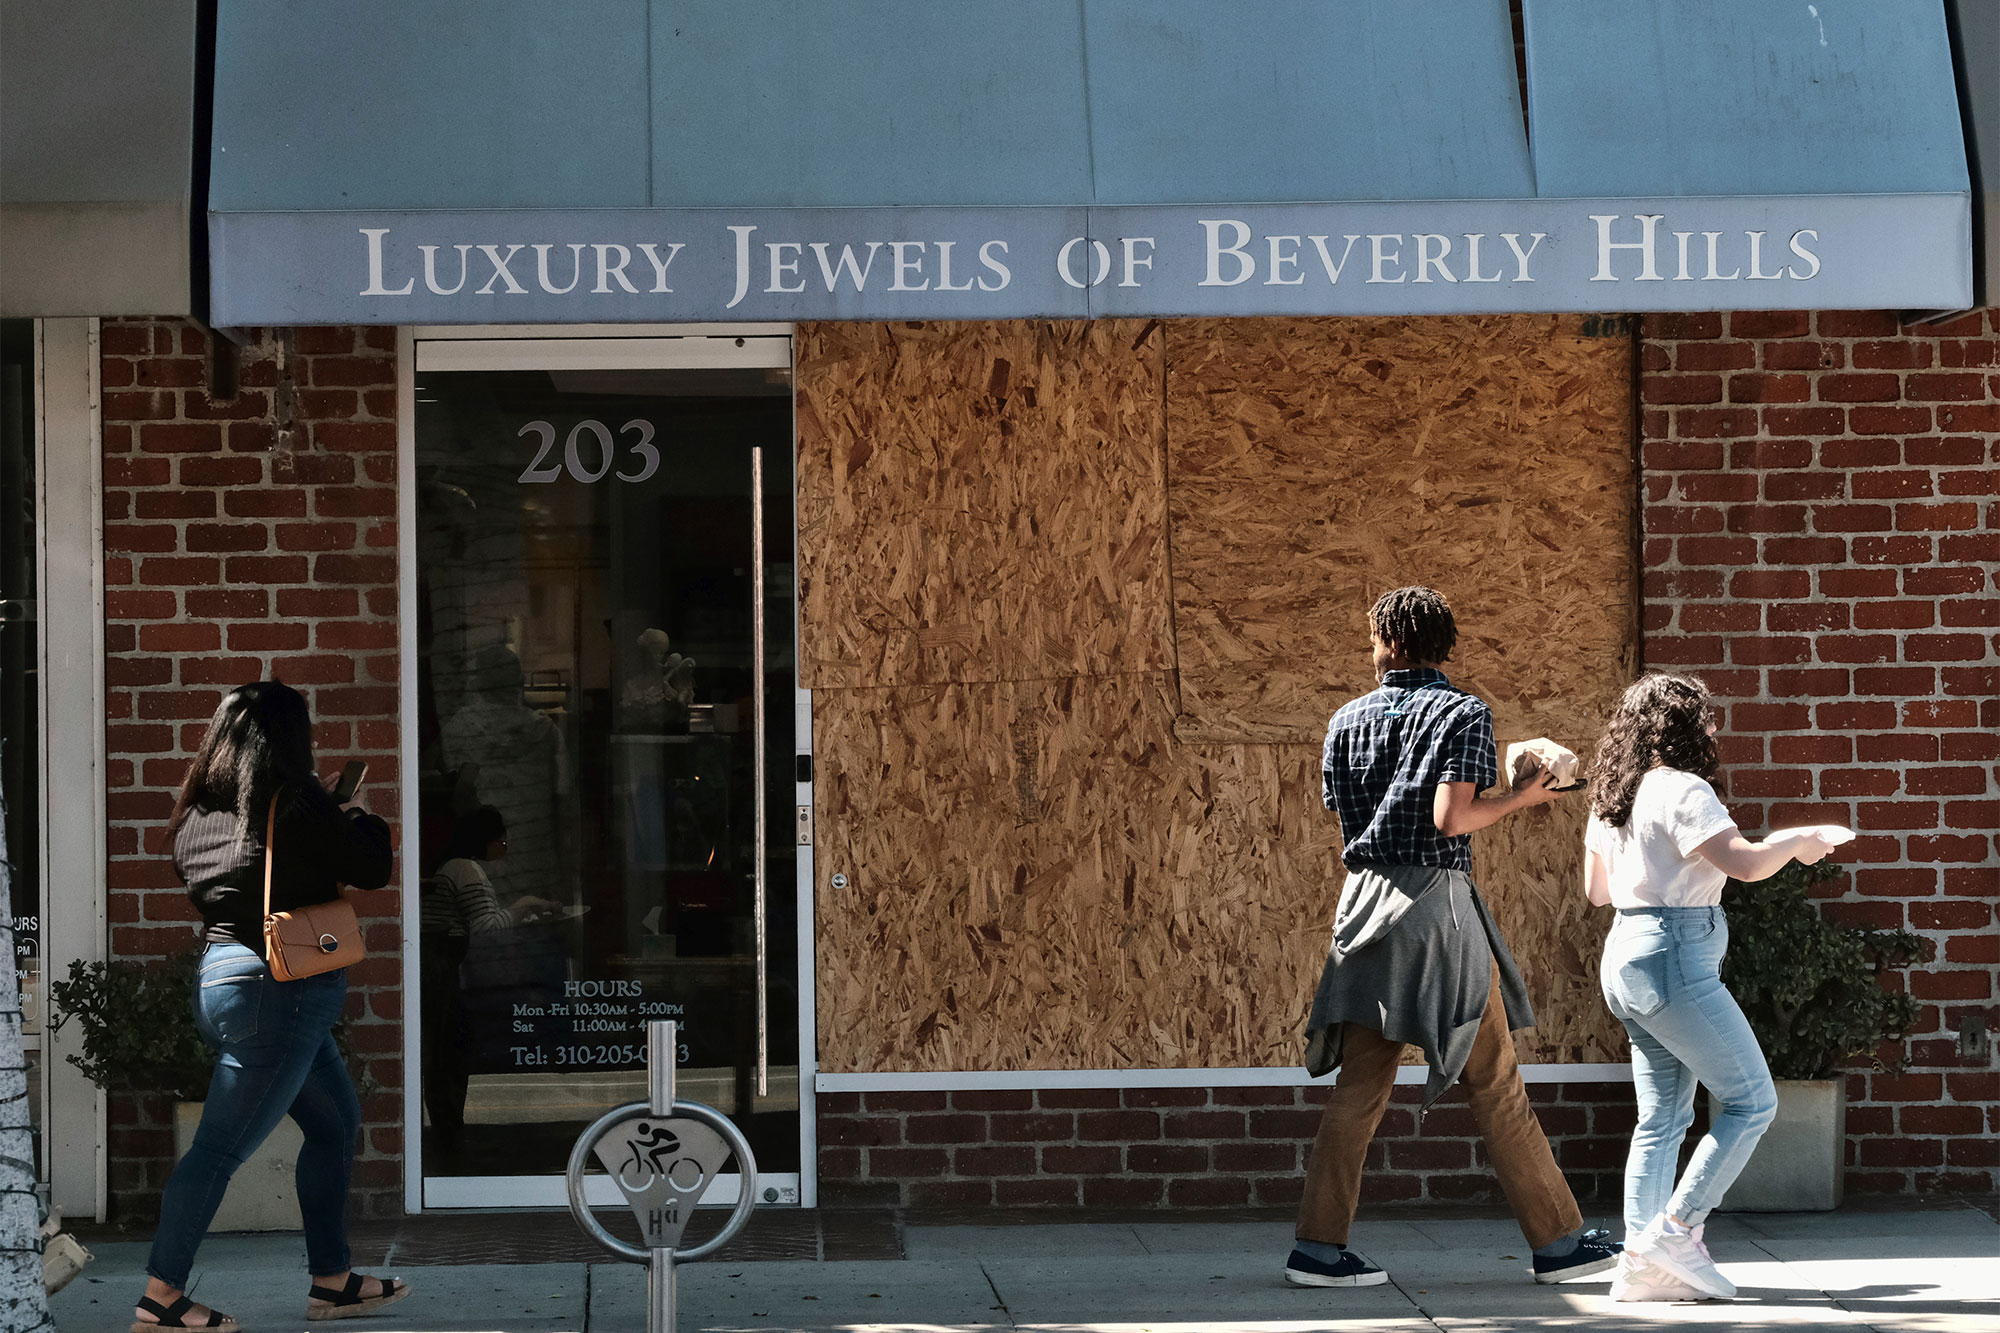 Pedestrians walk past a boarded up Luxury Jewels of Beverly Hills on Wednesday, March 23, 2022 in Beverly Hills, Calif. 